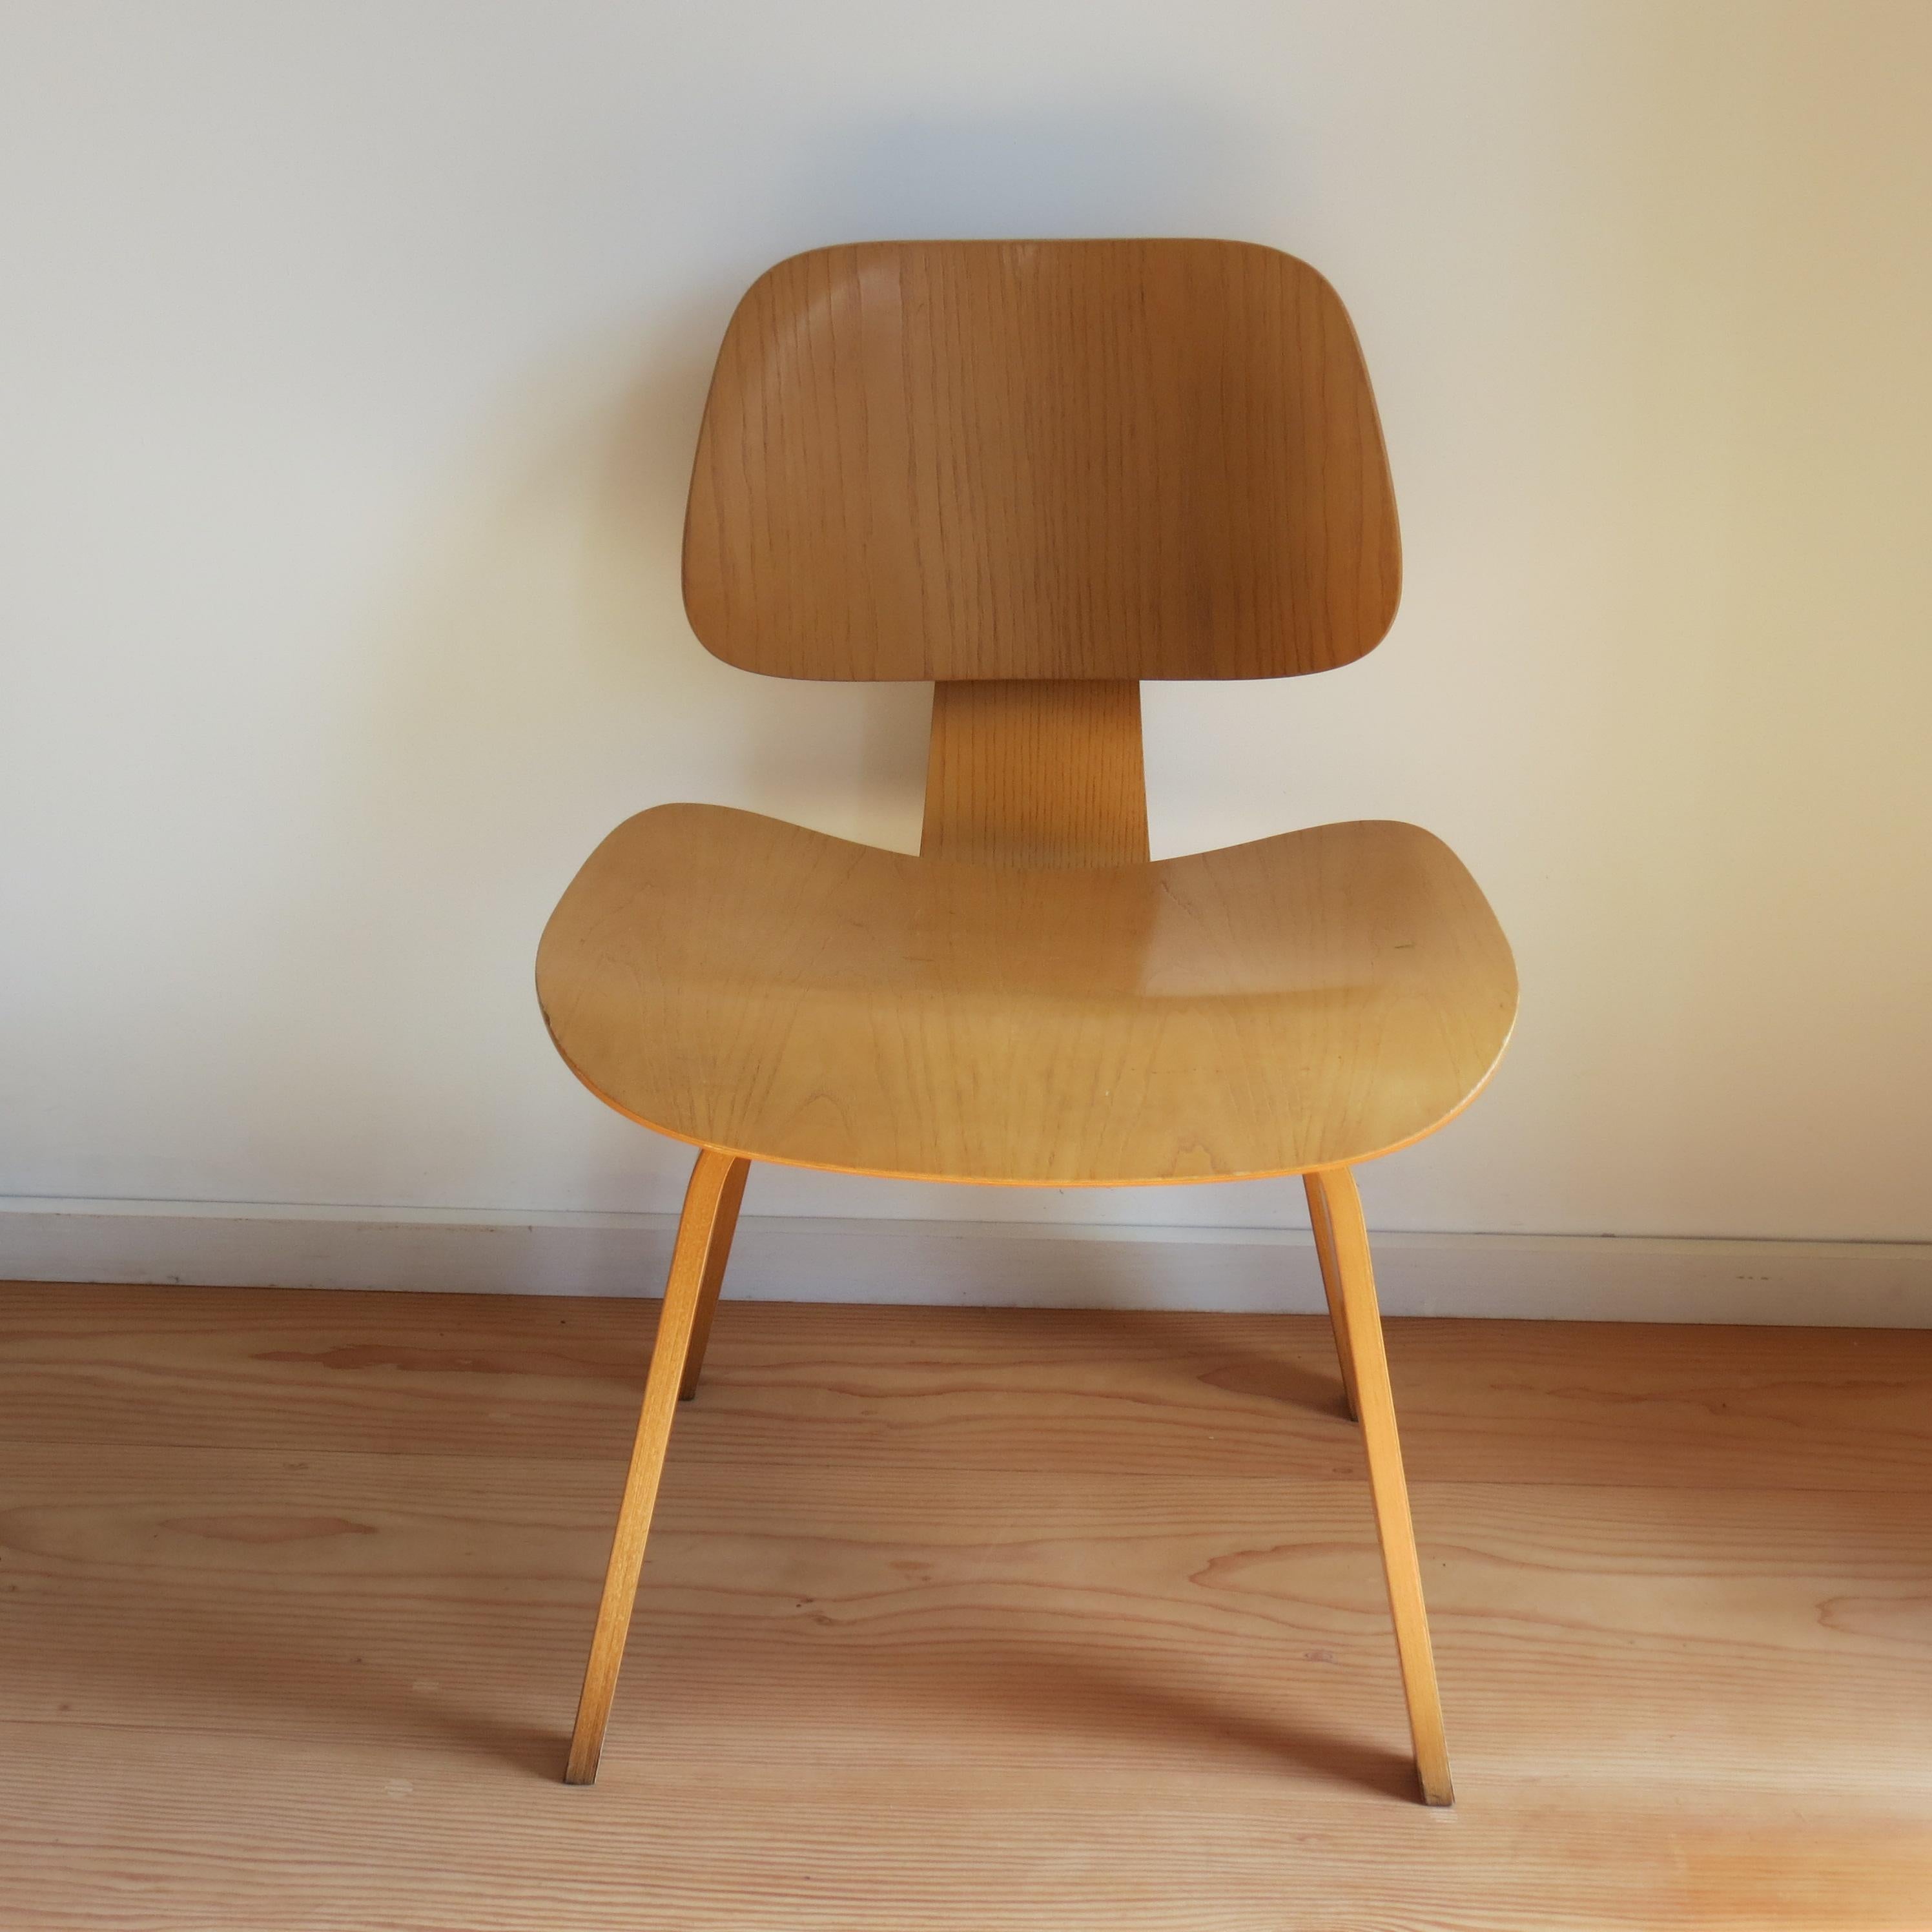 Wonderful DCW dining chair, designed by Charles Eames and manufactured by Vitra. 
Made from Ash veneered moulded plywood with rubber mounts. Vitra label to the underside, dated 1999.
In good vintage condition, minimal signs of wear over all as can